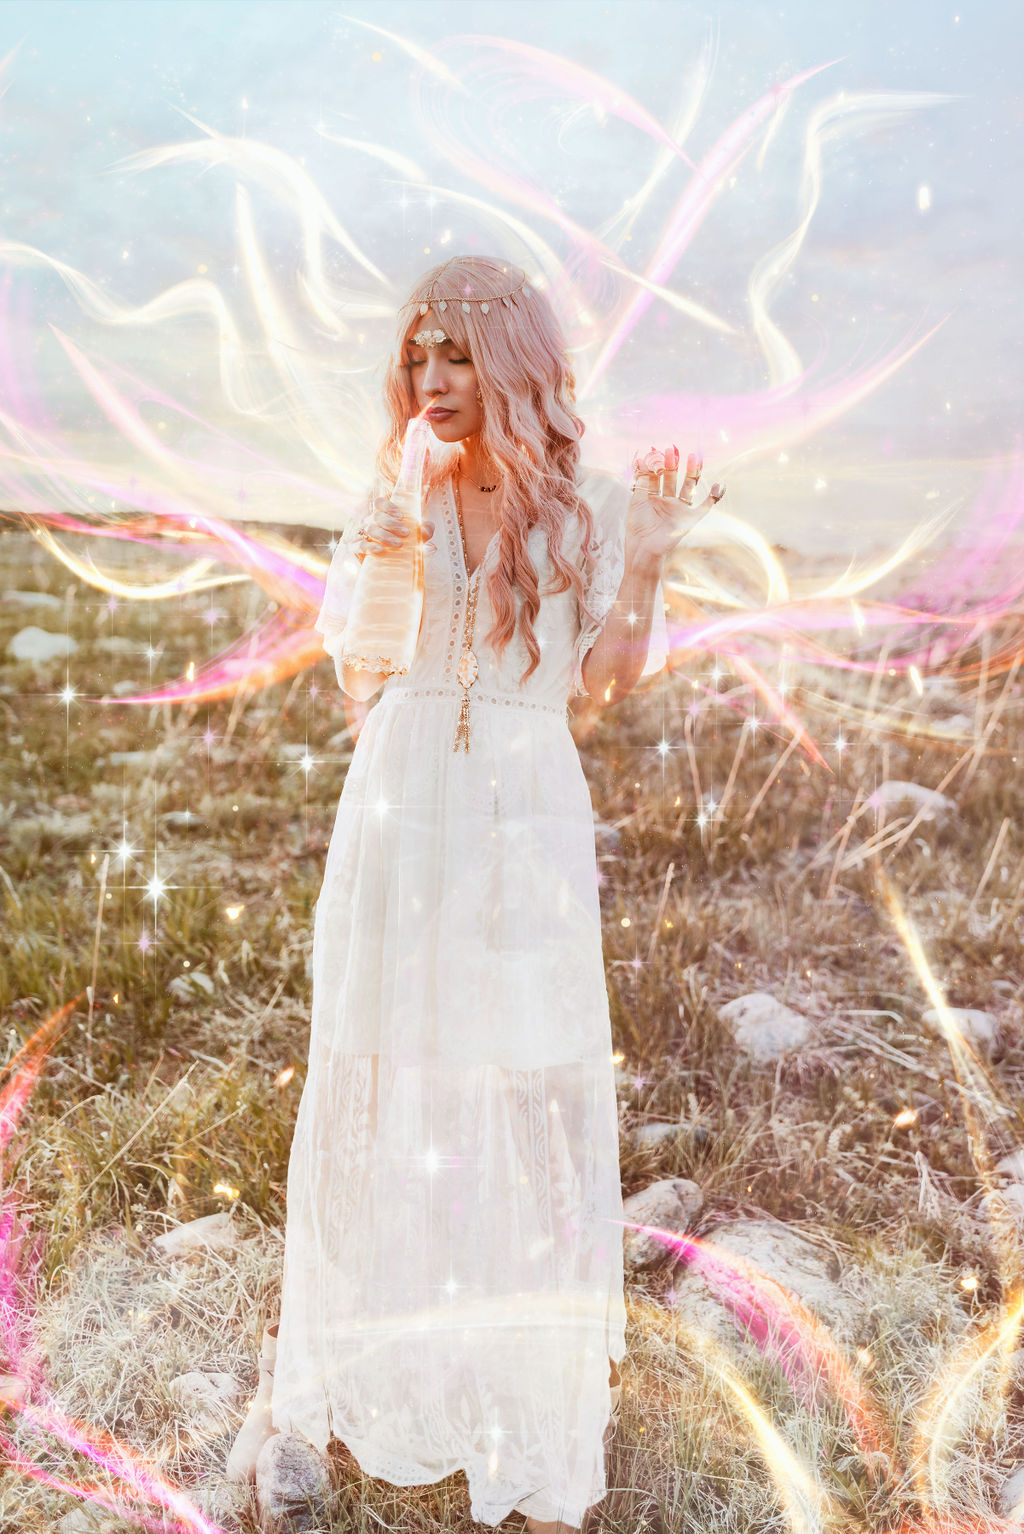 Girl with pink hair in a white dress inhales magic coming from a bottle of golden liquid as magic surrounds her for a fantasy image taken in Boulder Colorado by Kendra Colleen Photography